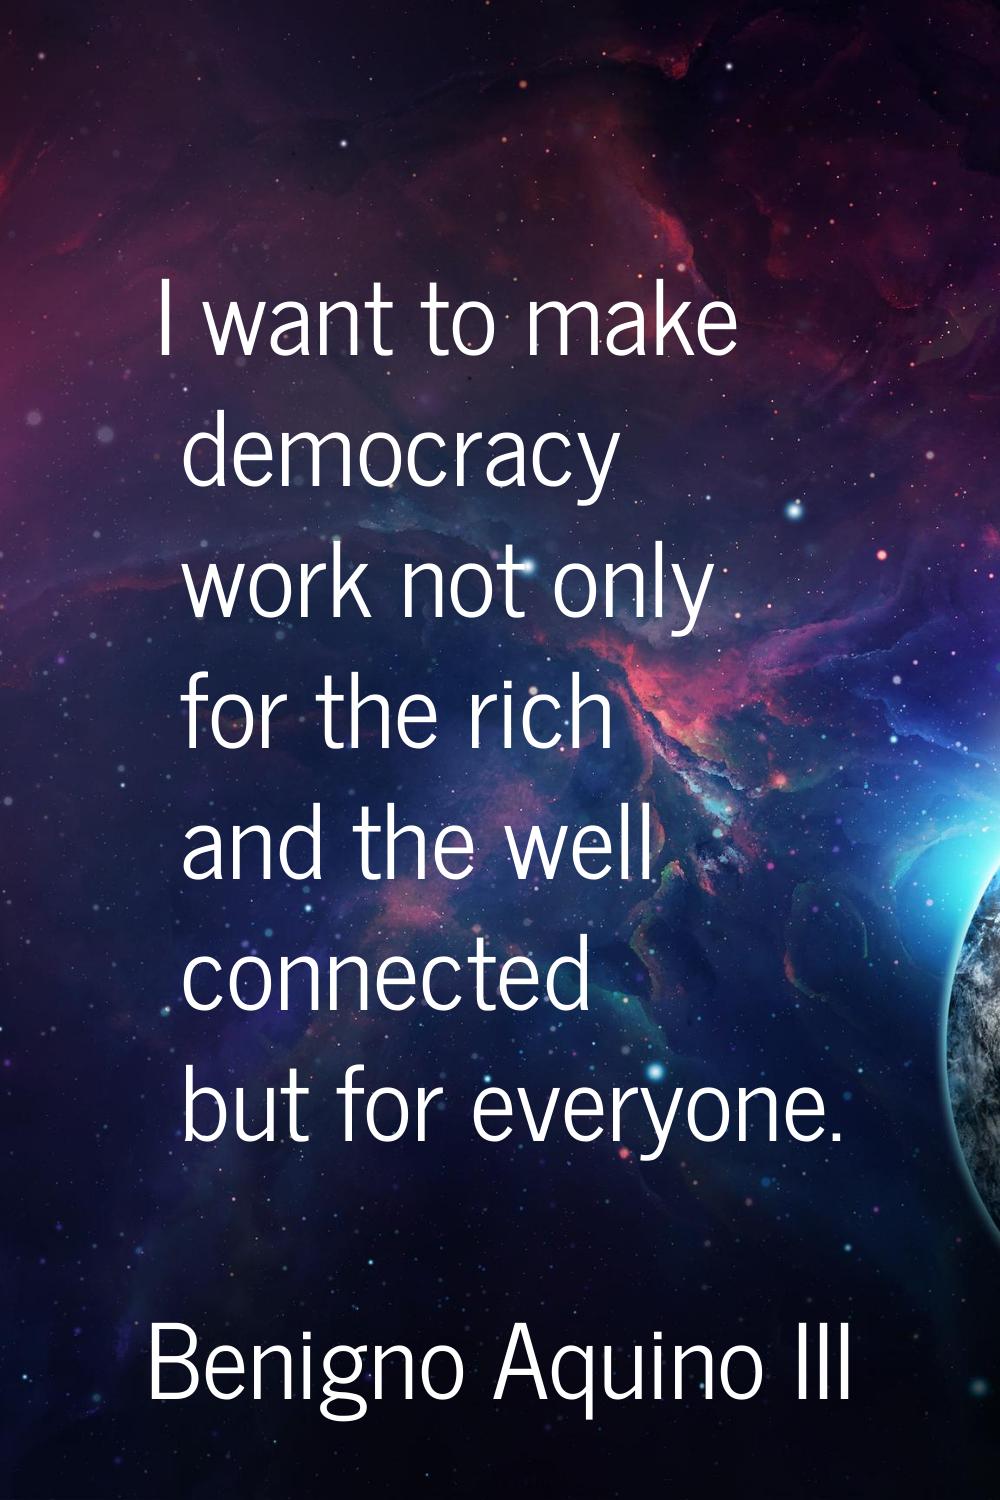 I want to make democracy work not only for the rich and the well connected but for everyone.